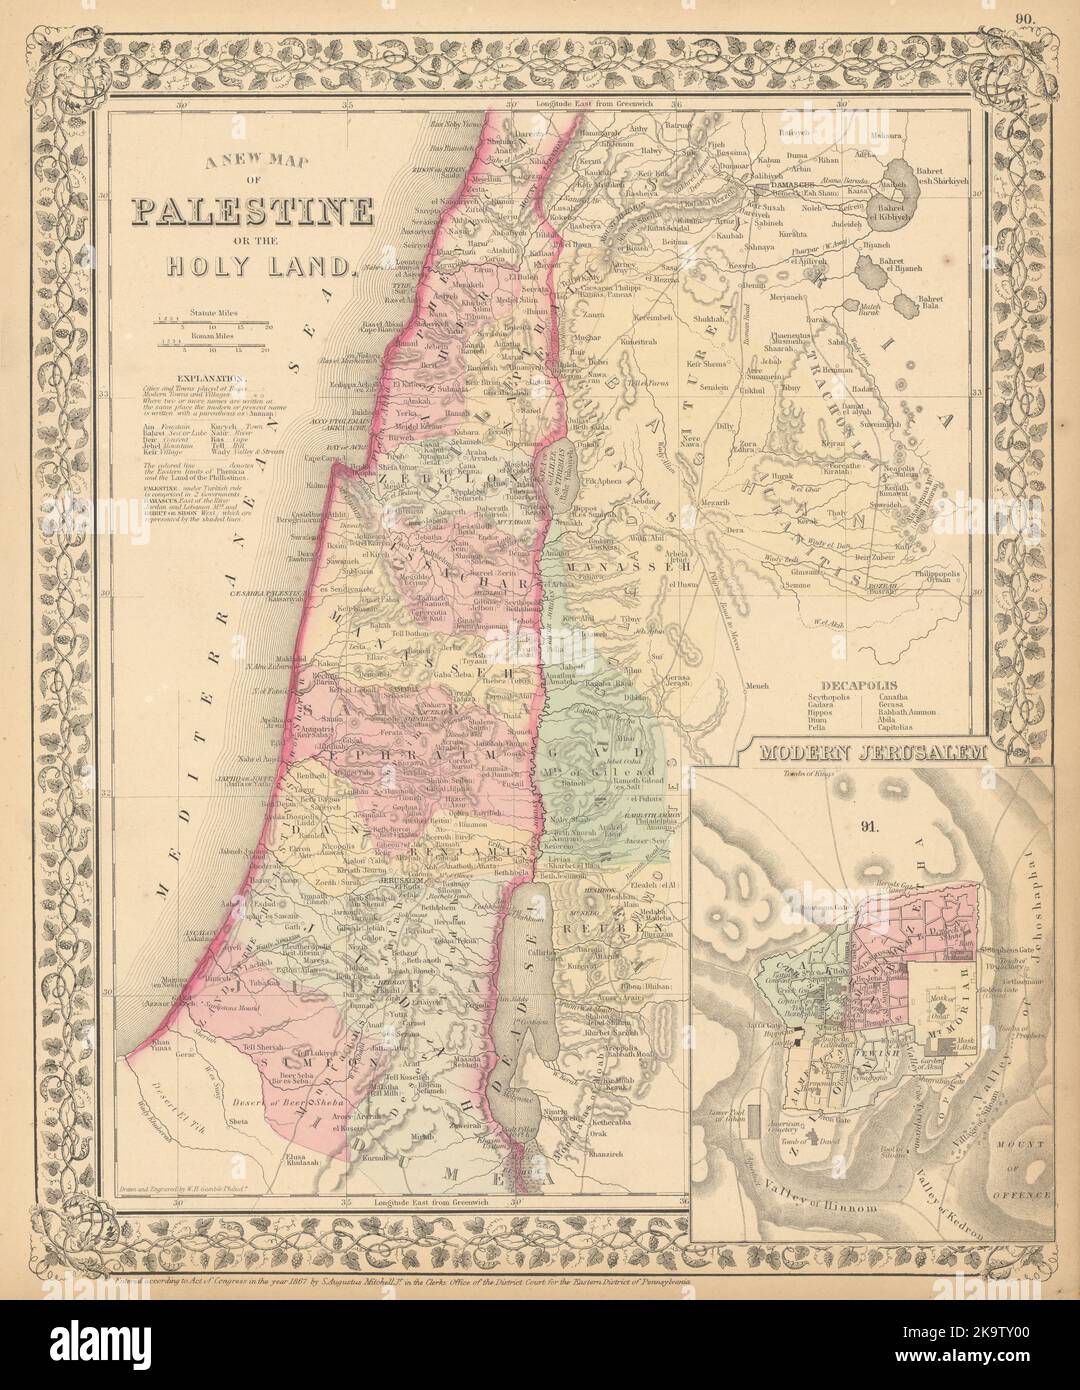 A New map of Palestine or the Holy Land. Jerusalem. Israel. MITCHELL 1869 Stock Photo